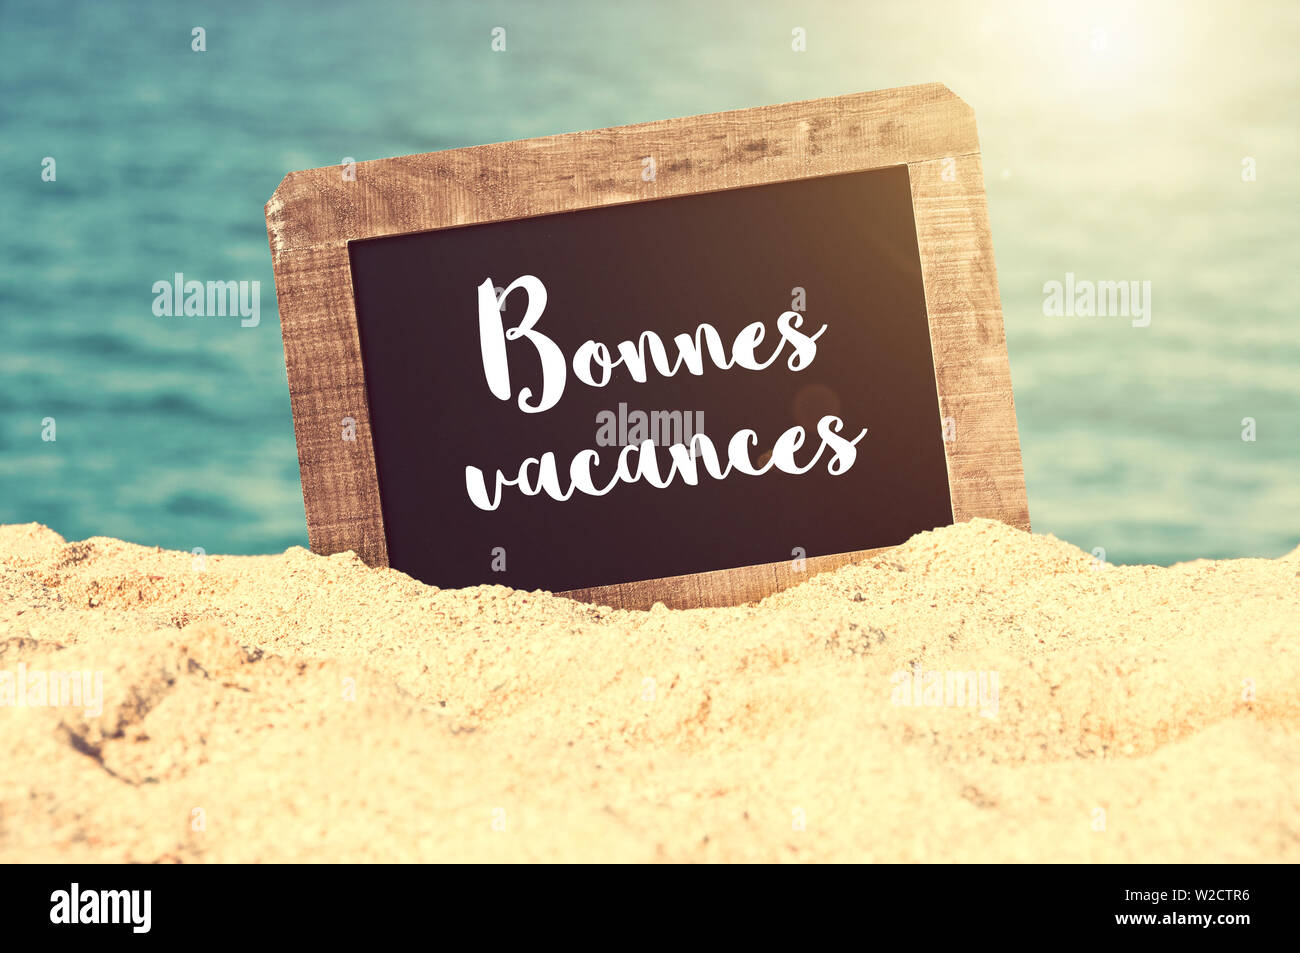 Bonnes vacances (meaning Happy holiday in French) written on a vintage chalkboard in the sand of a beach Stock Photo